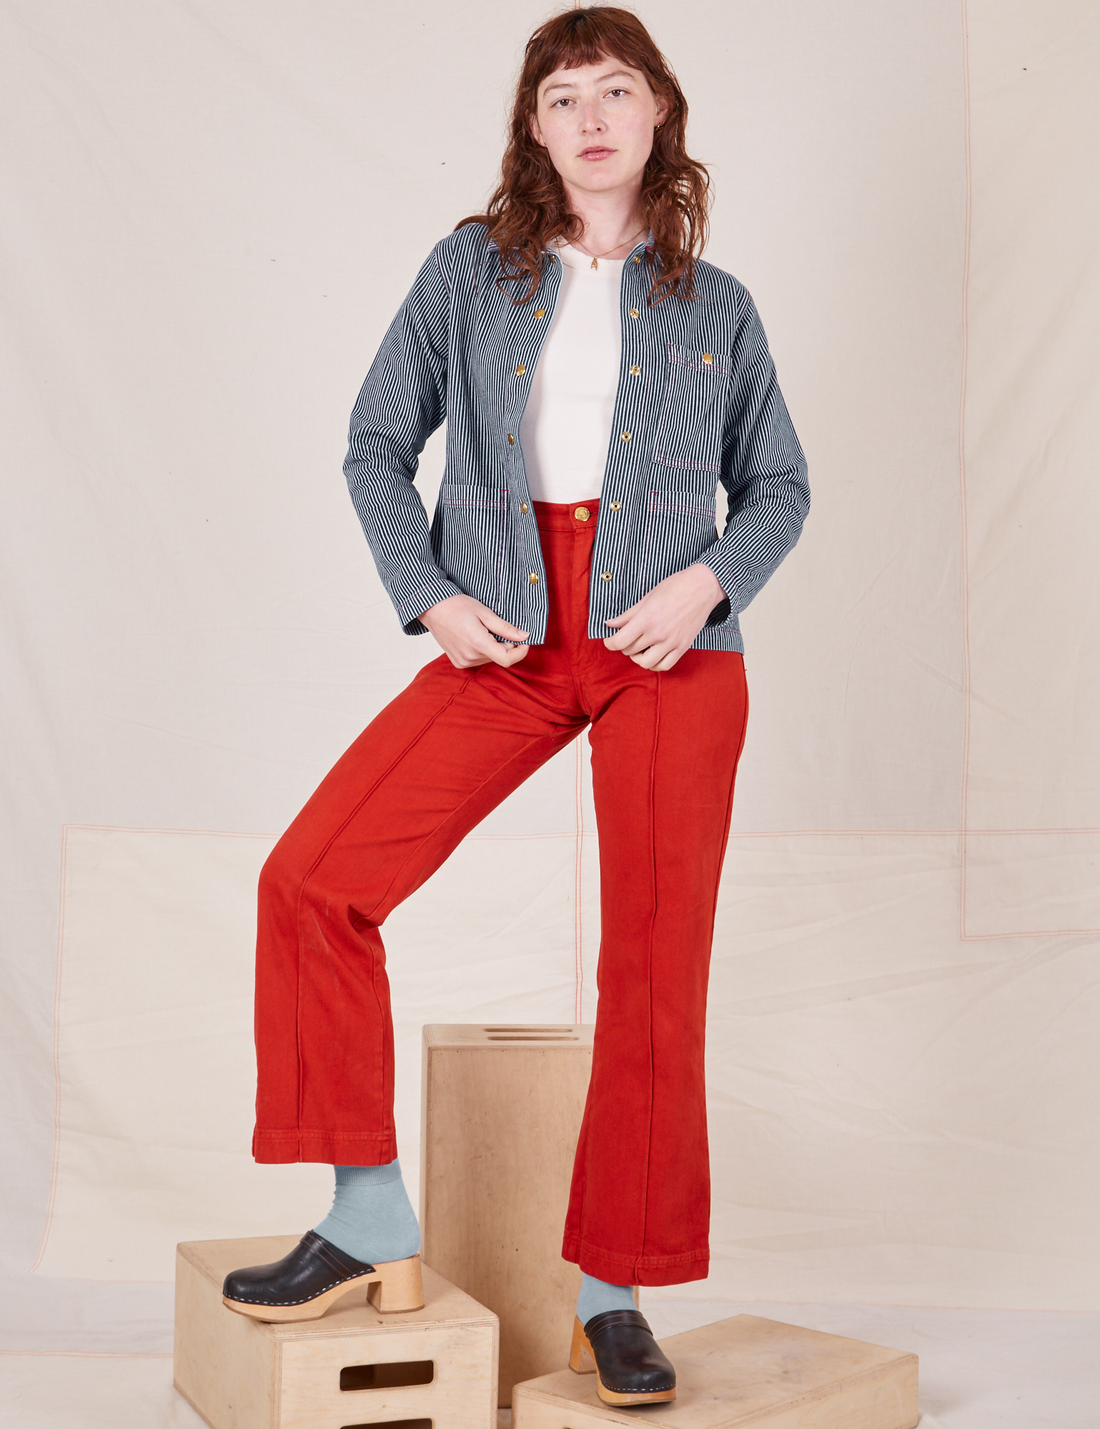 Alex is 5'8" and wearing XXS Railroad Stripe Denim Work Jacket paired with paprika Western Pants